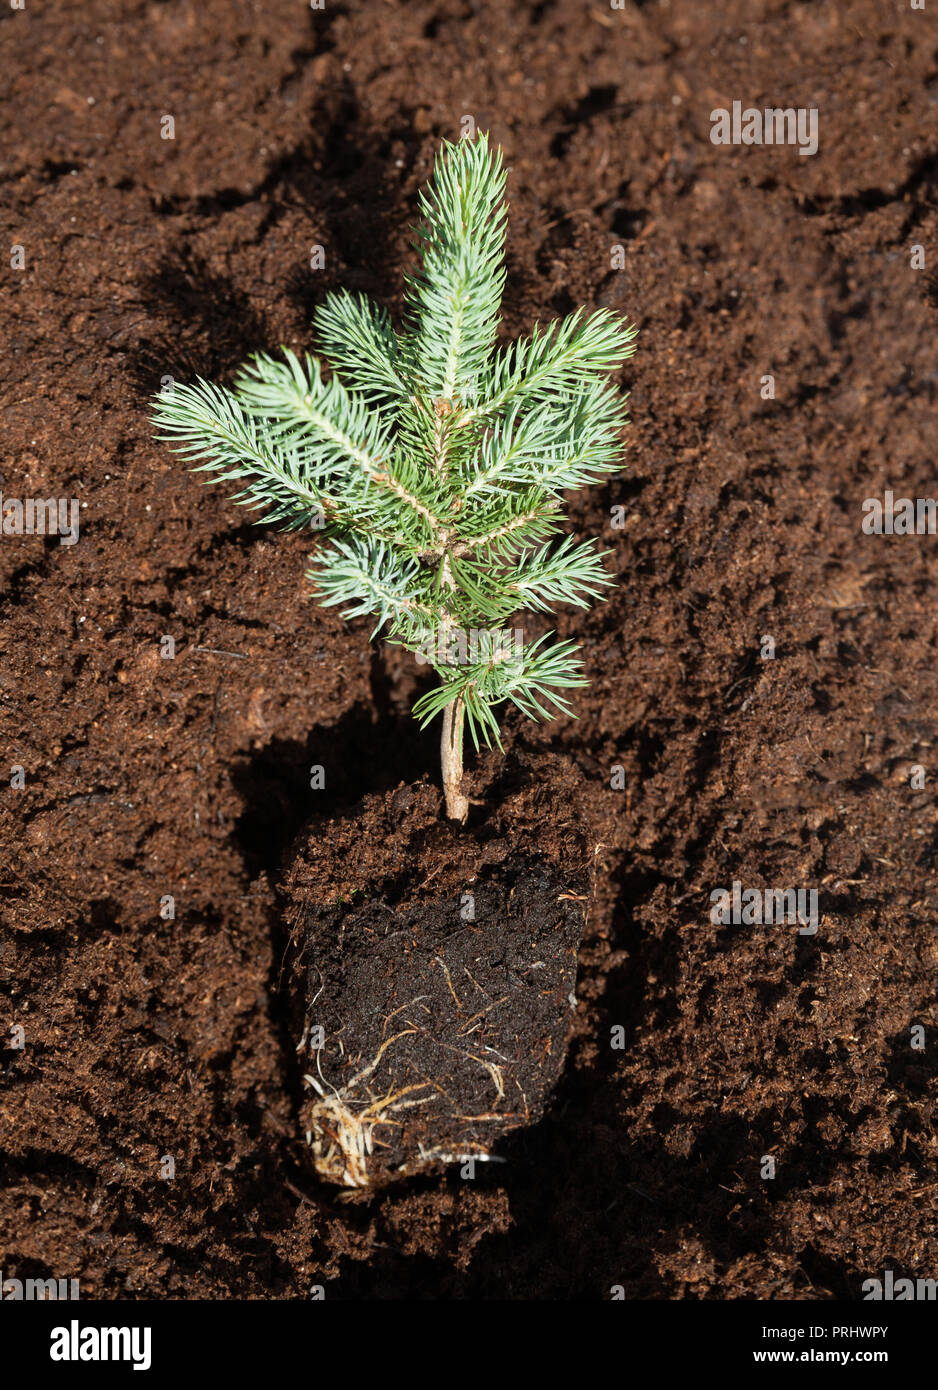 Planting of a fir tree in a ground. Stock Photo